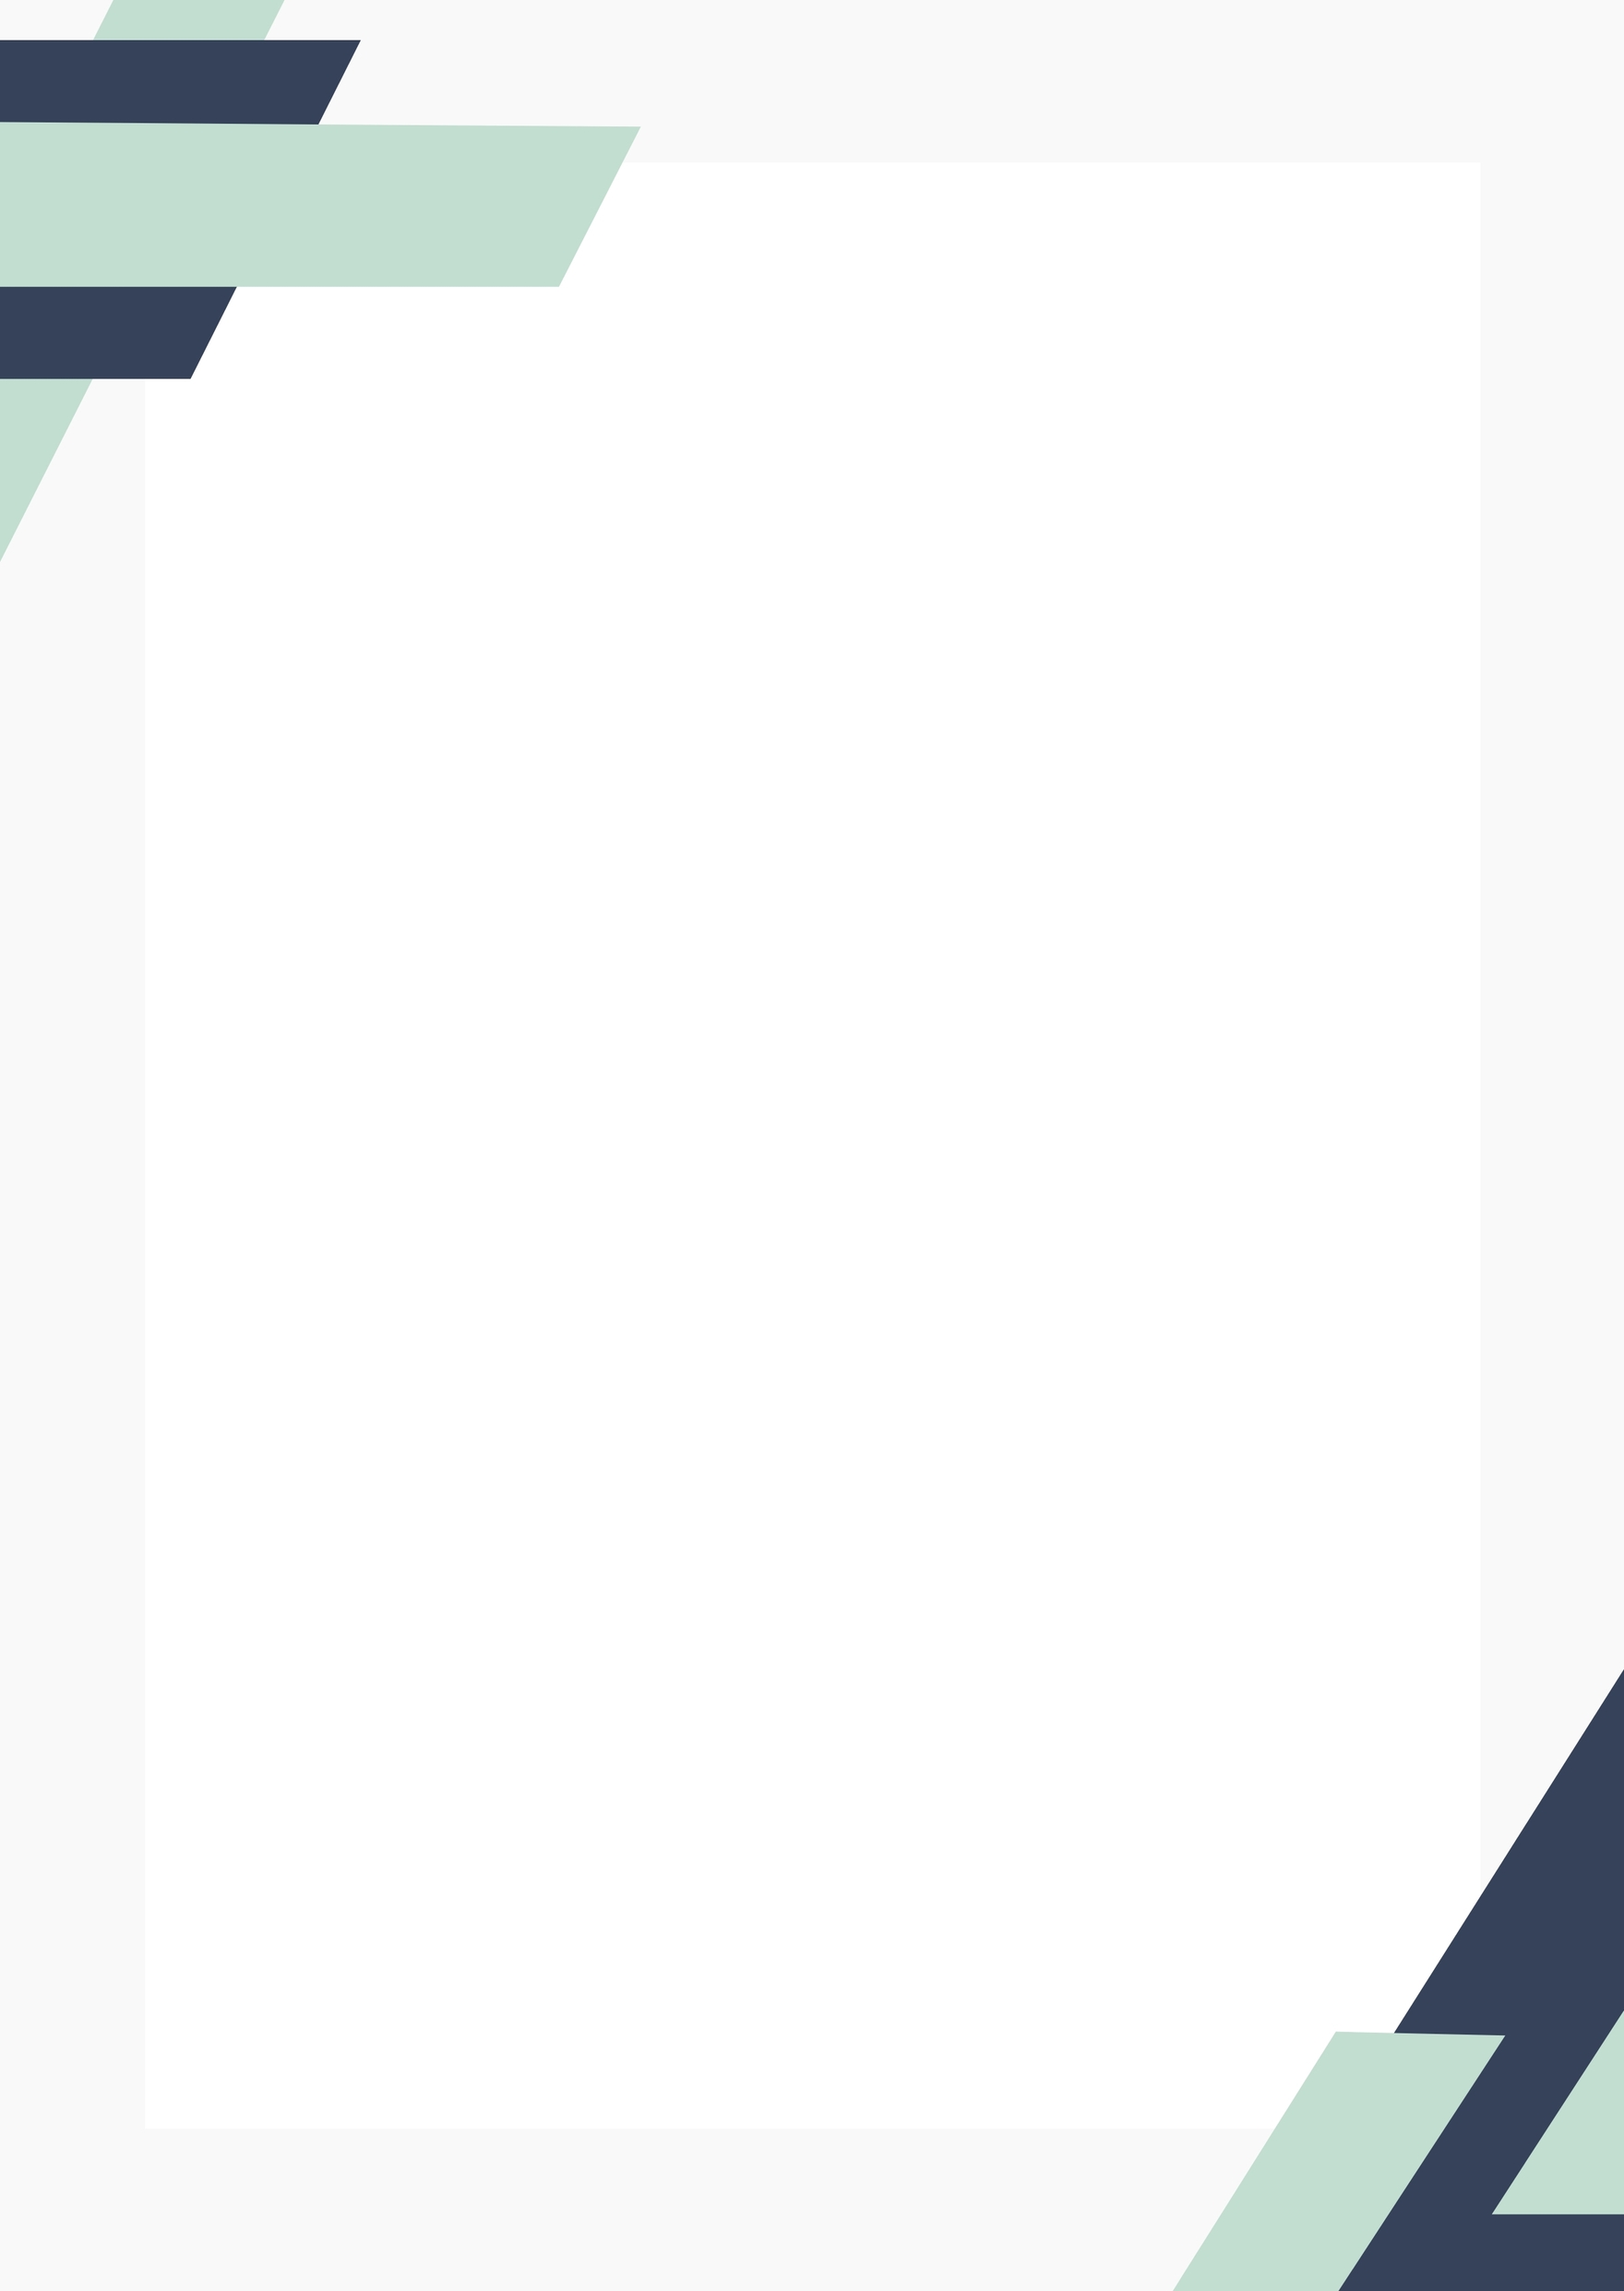 Free Formal Page Border Template Download In Word Google Docs Illustrator Template